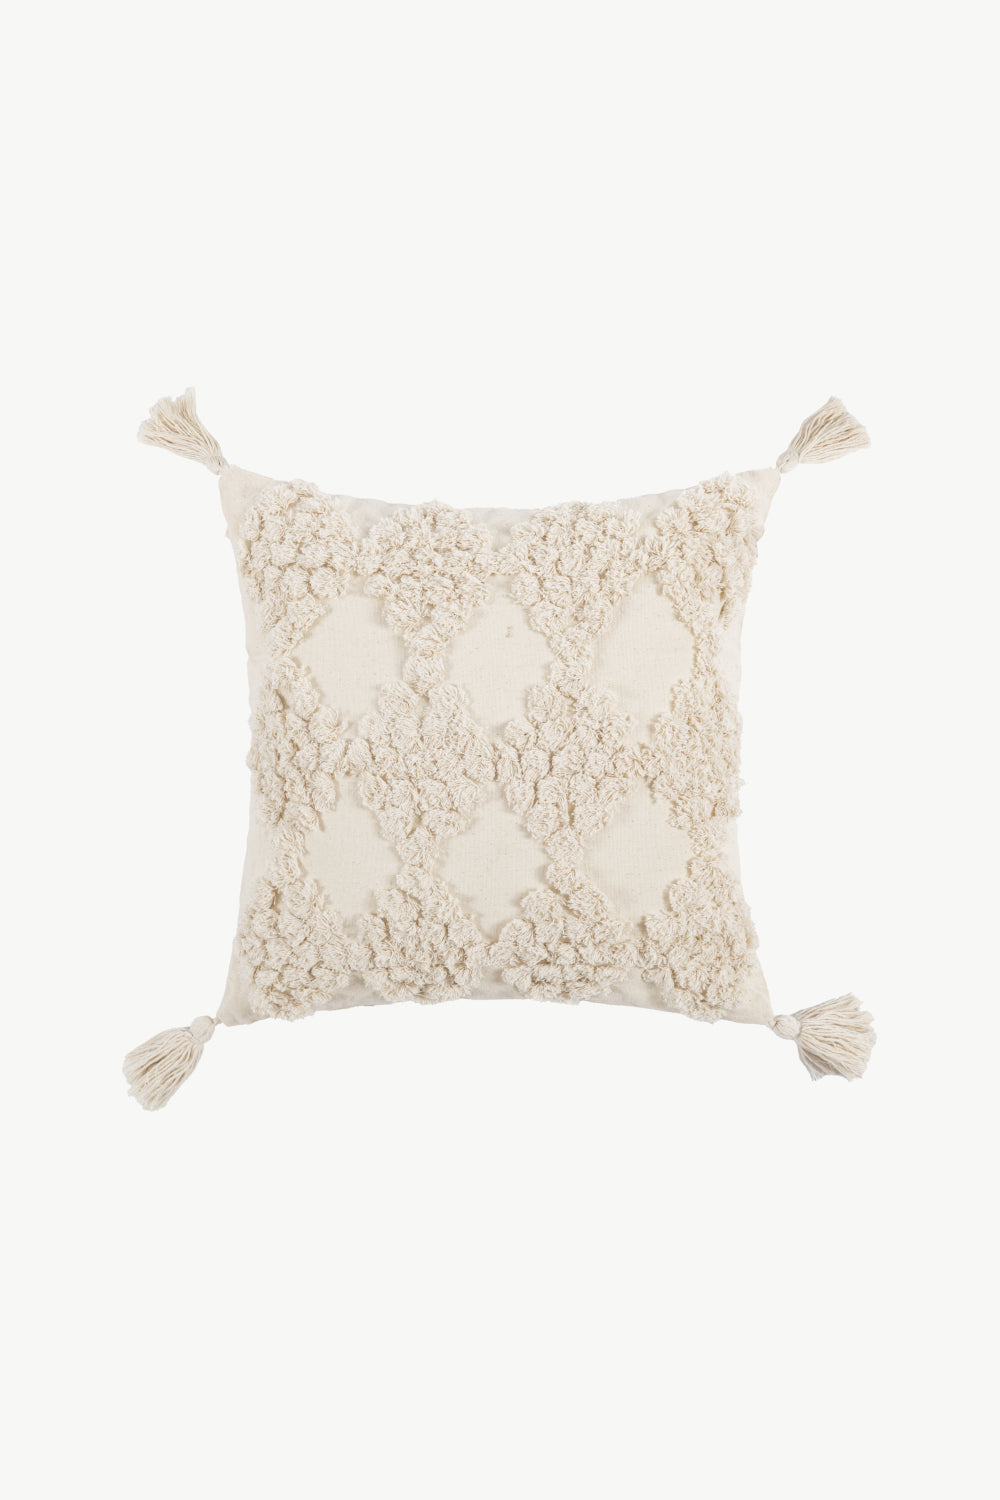 Chenille Decorative Throw Pillow Covers (Neutral Textures)